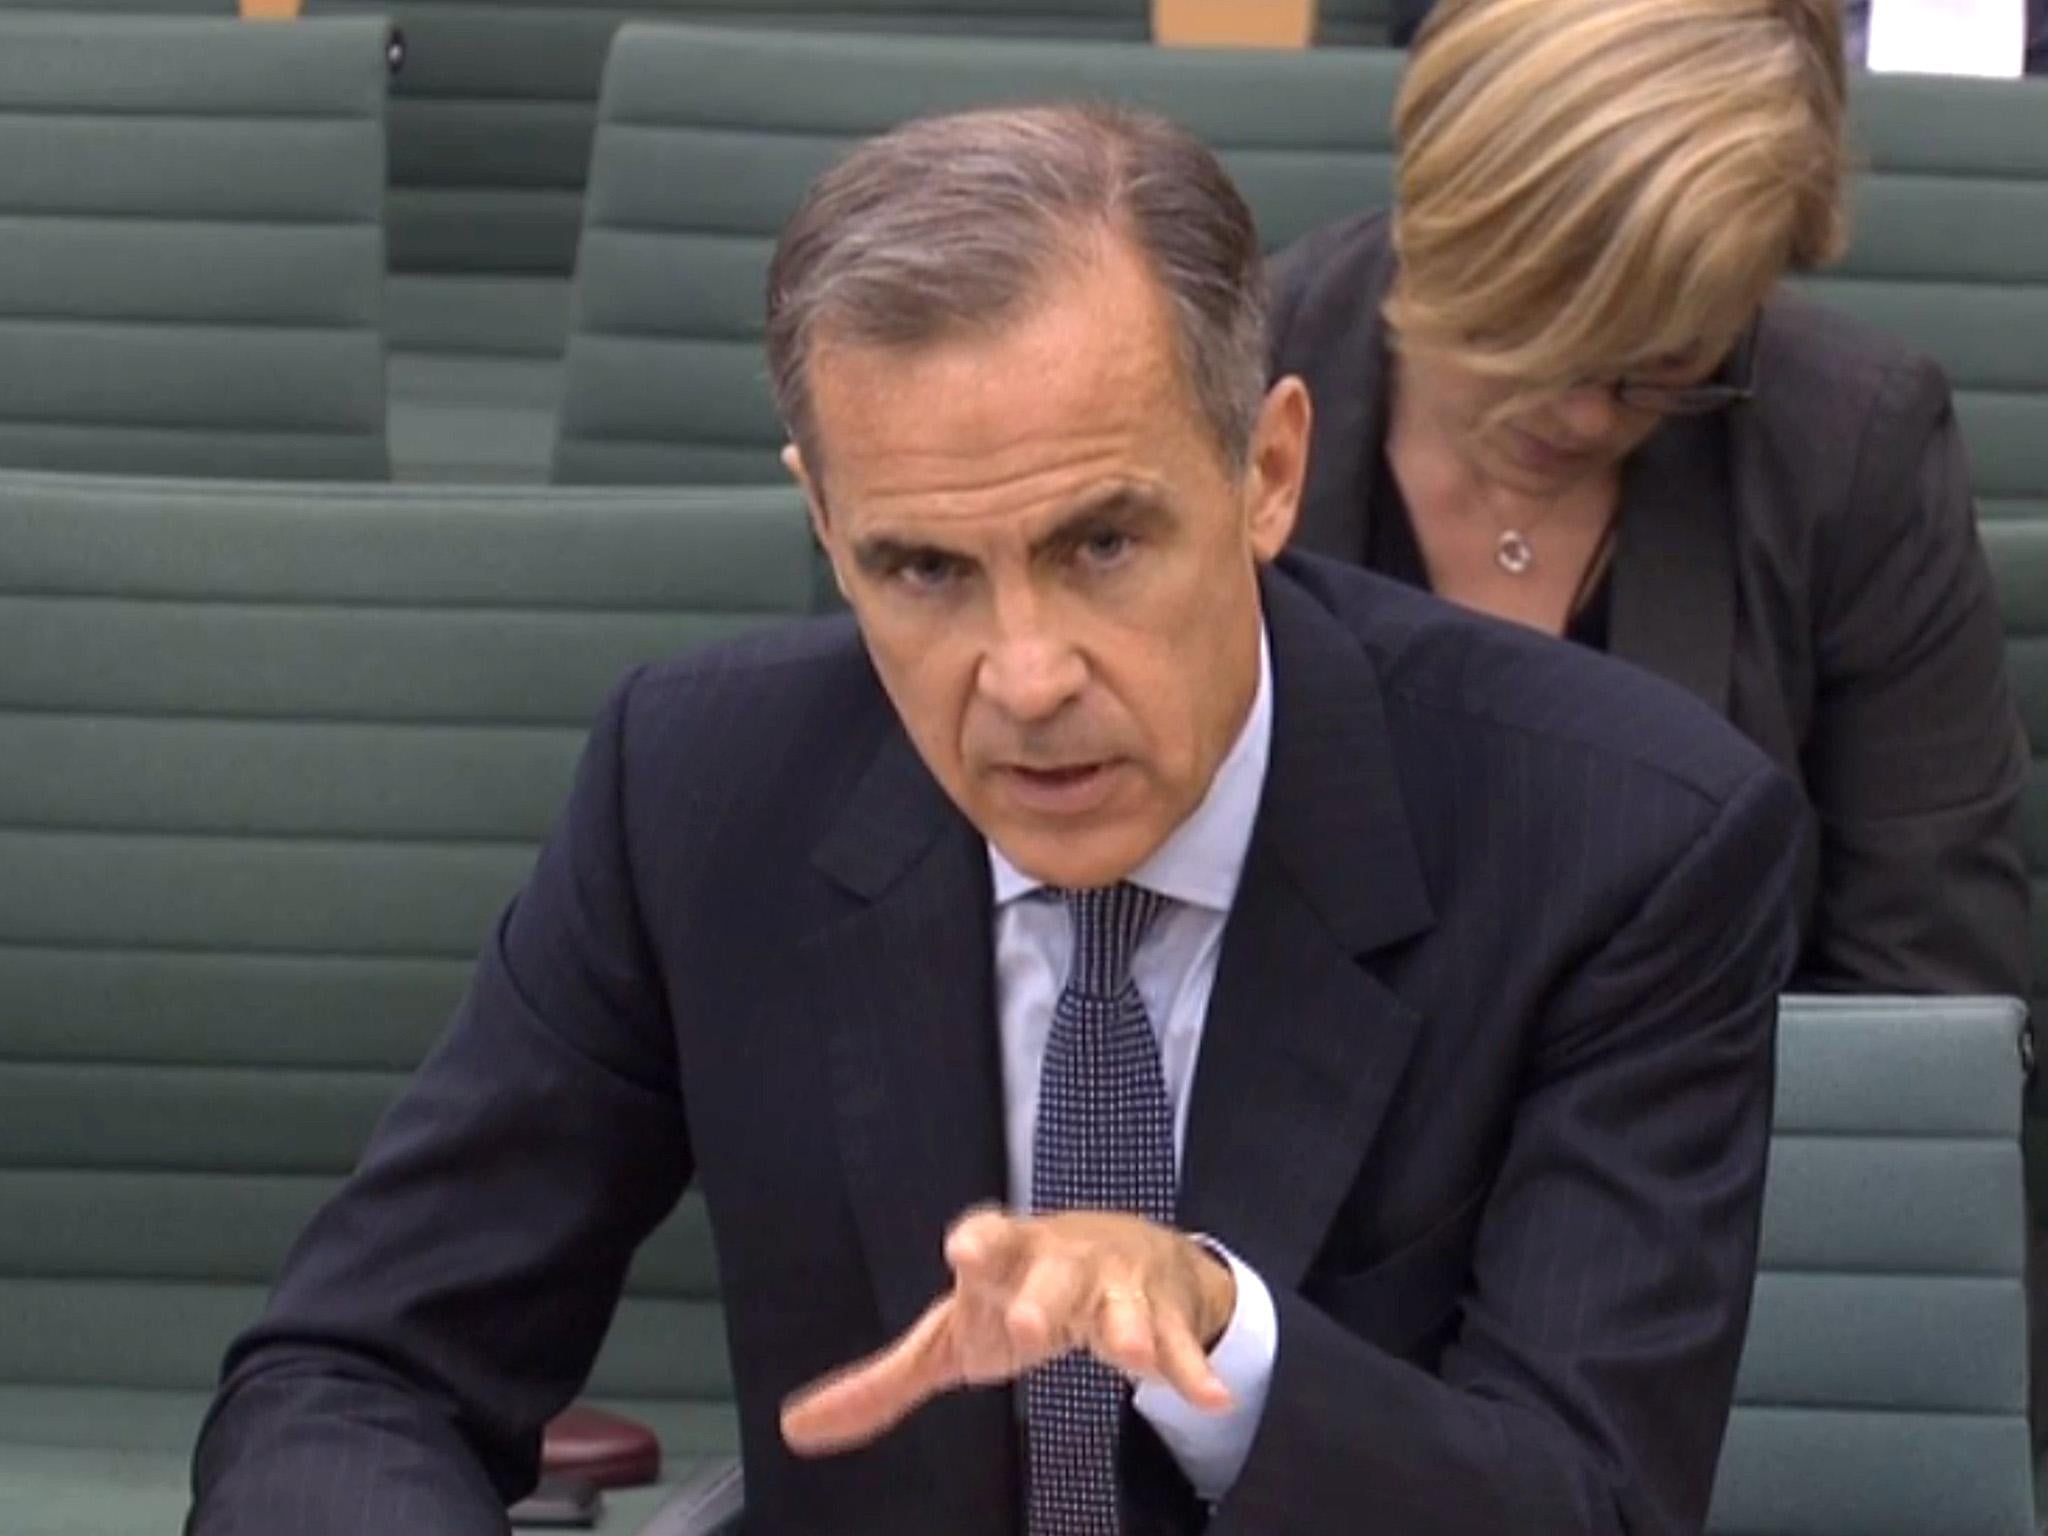 Governor Mark Carney giving evidence to the UK Parliament's Treasury Committee